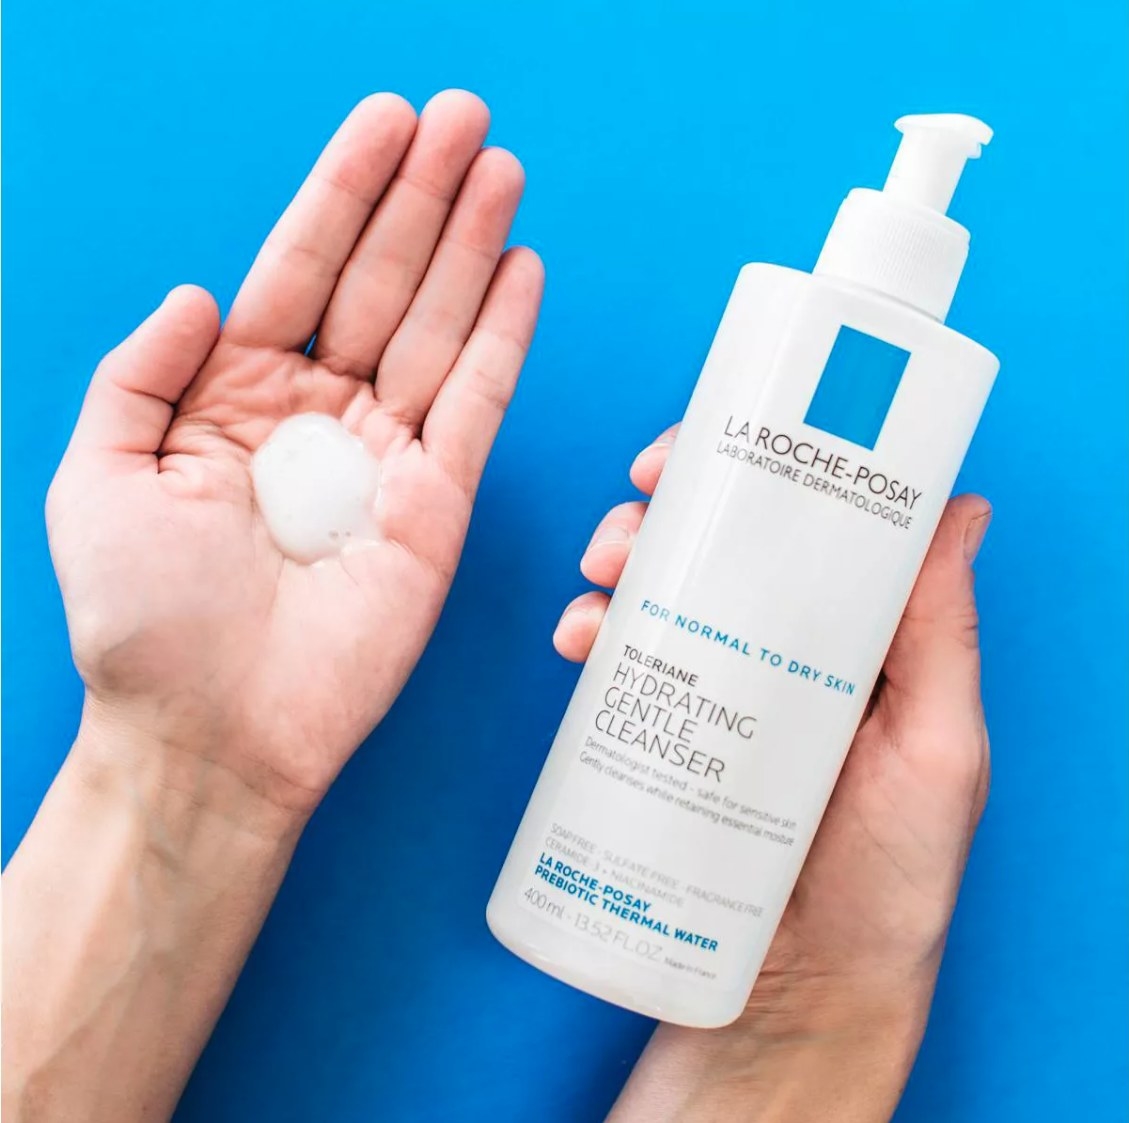 Hand holding cleanser while other hand shows formula in palm